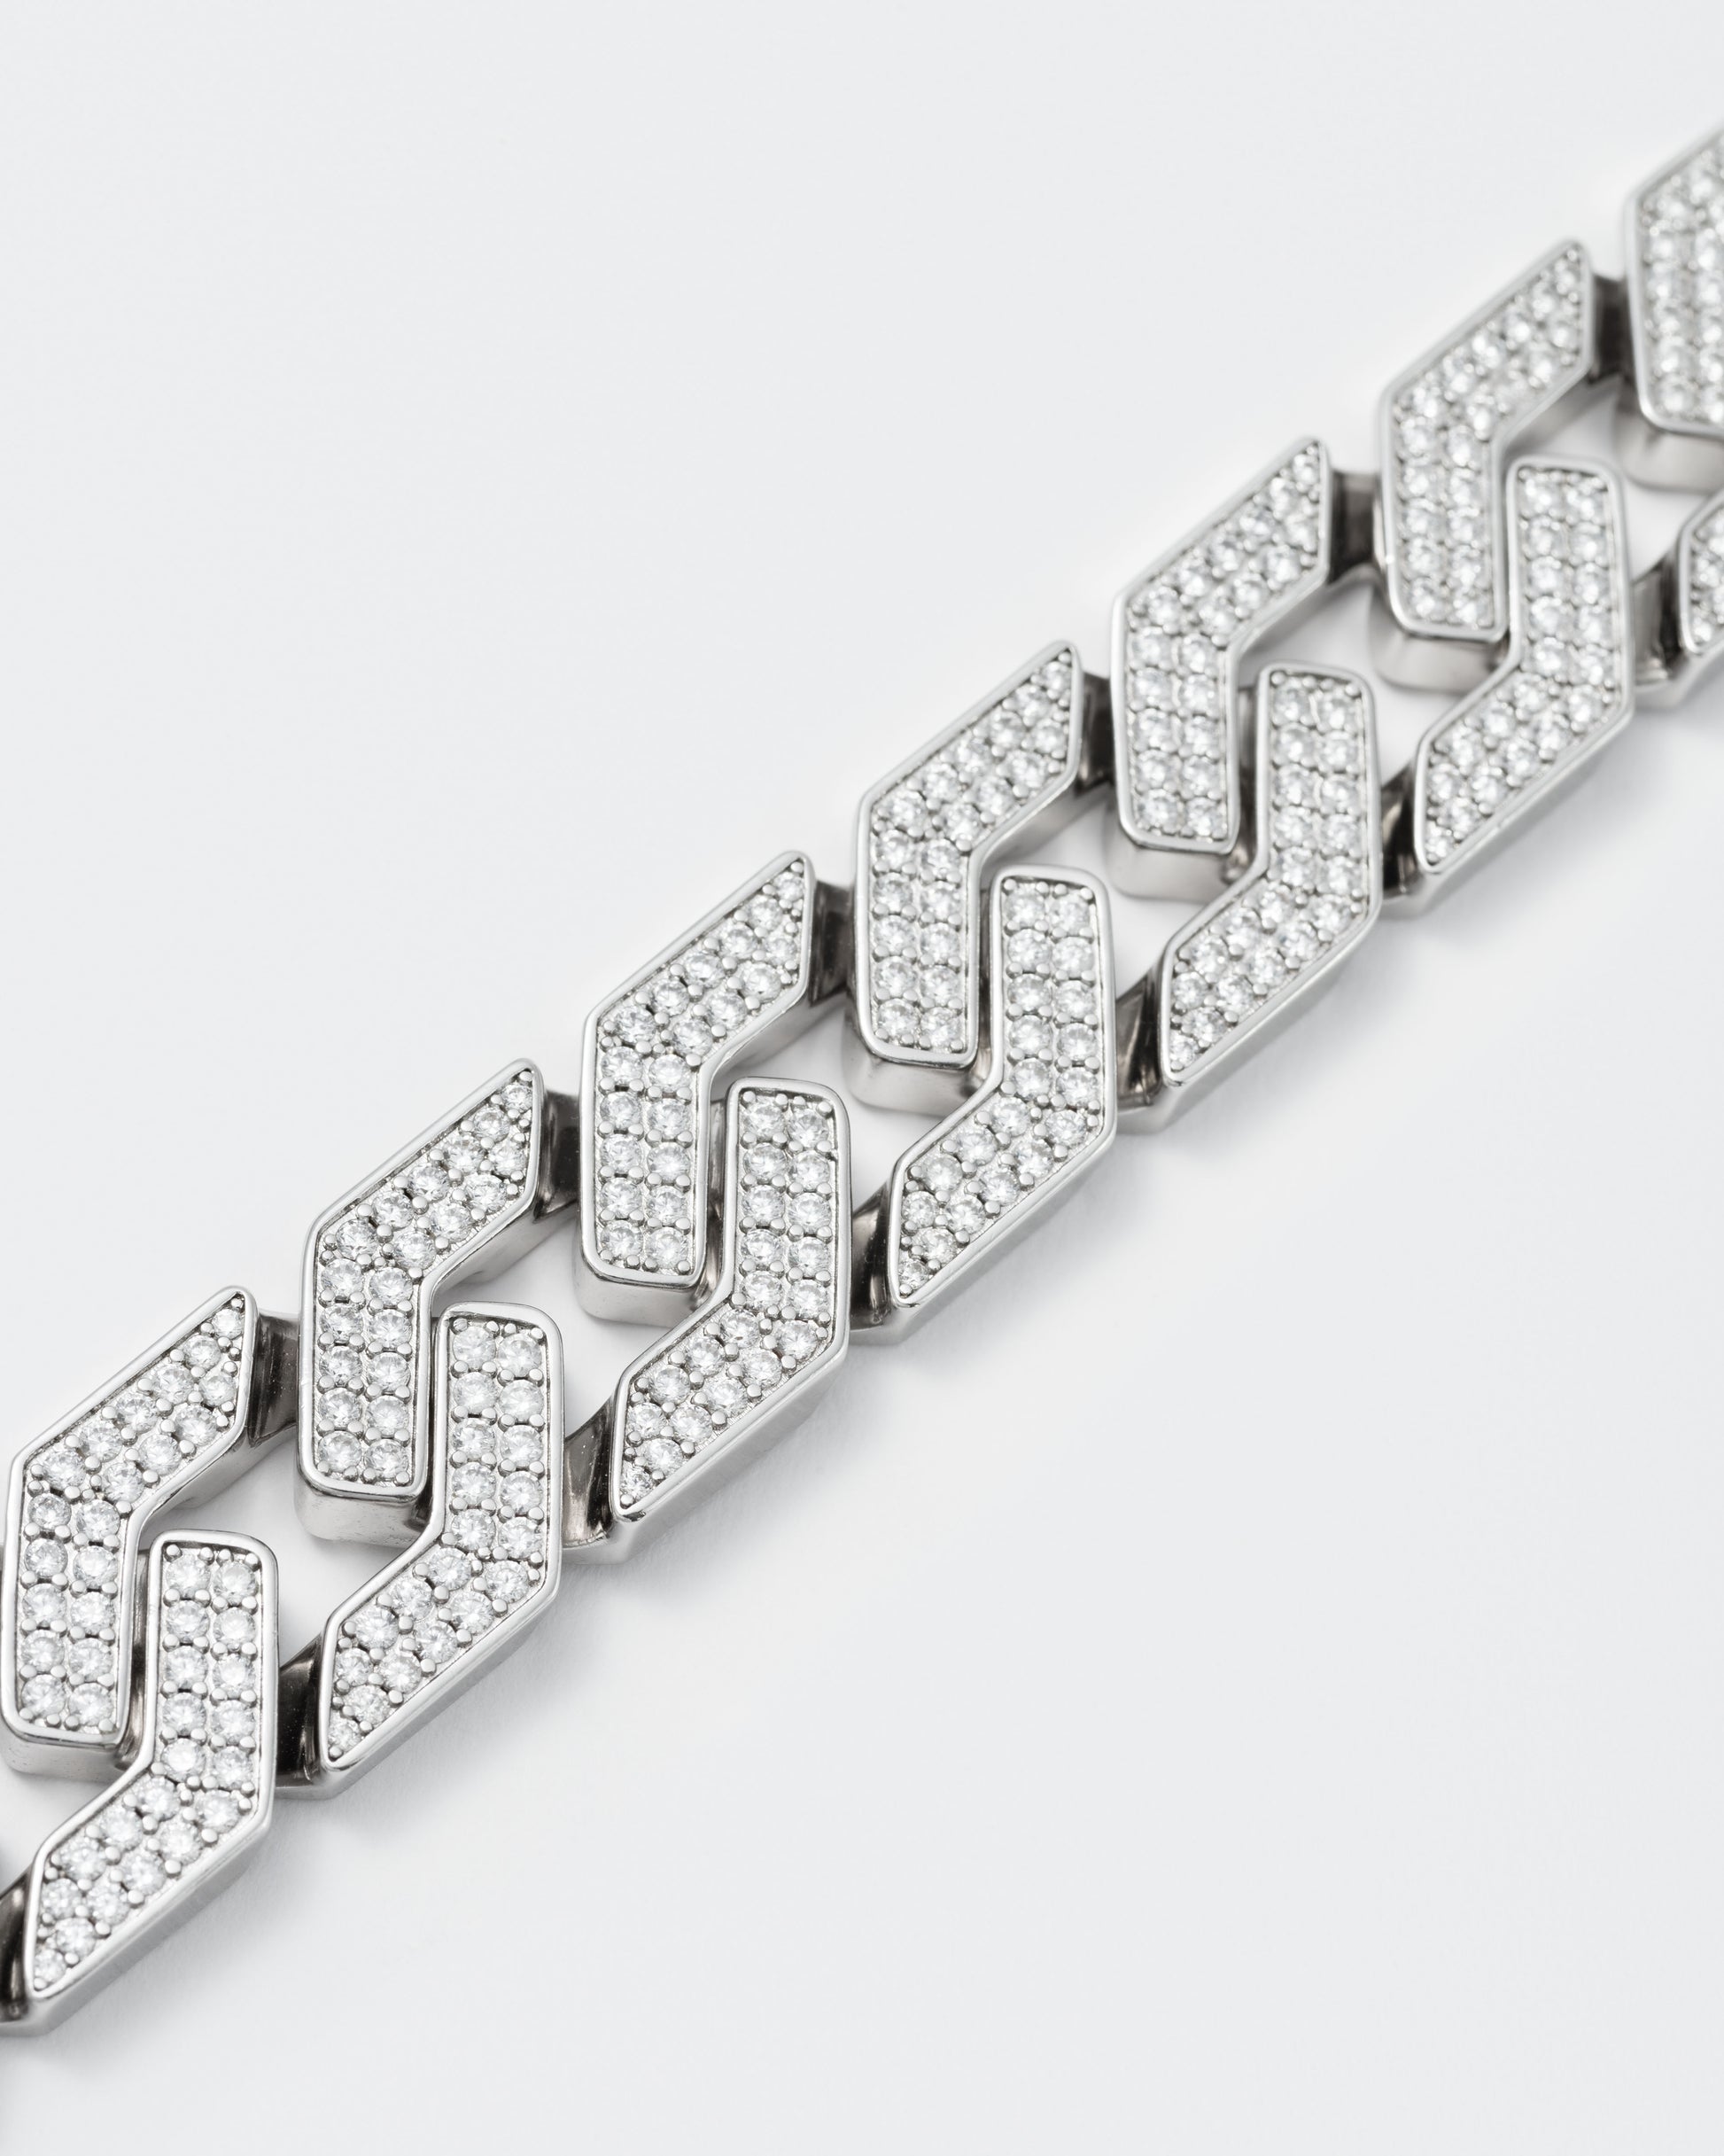 detail of oversize prong chain bracelet with 18kt white gold coating and hand-set micropavé stones in diamond white. Fine jewelry grade drawer closure with logo.